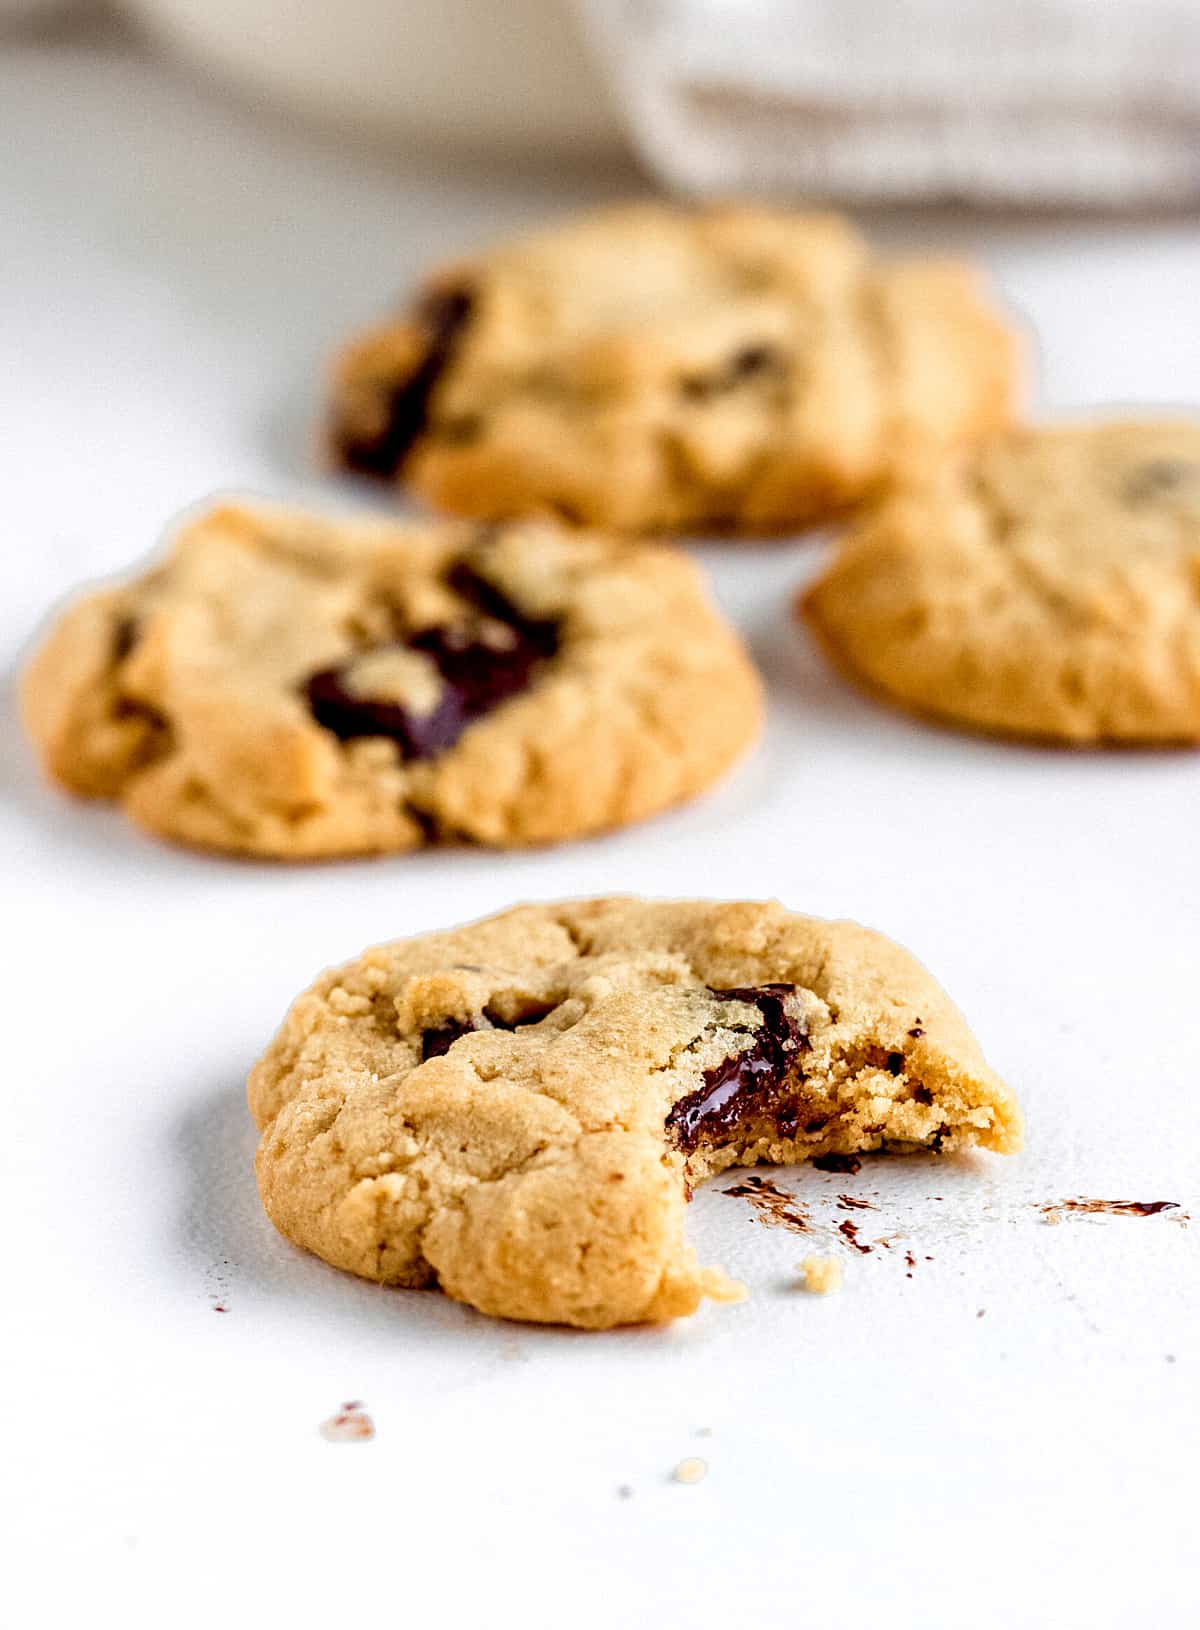 Cookies on white table, one is bitten, others are blurred in background